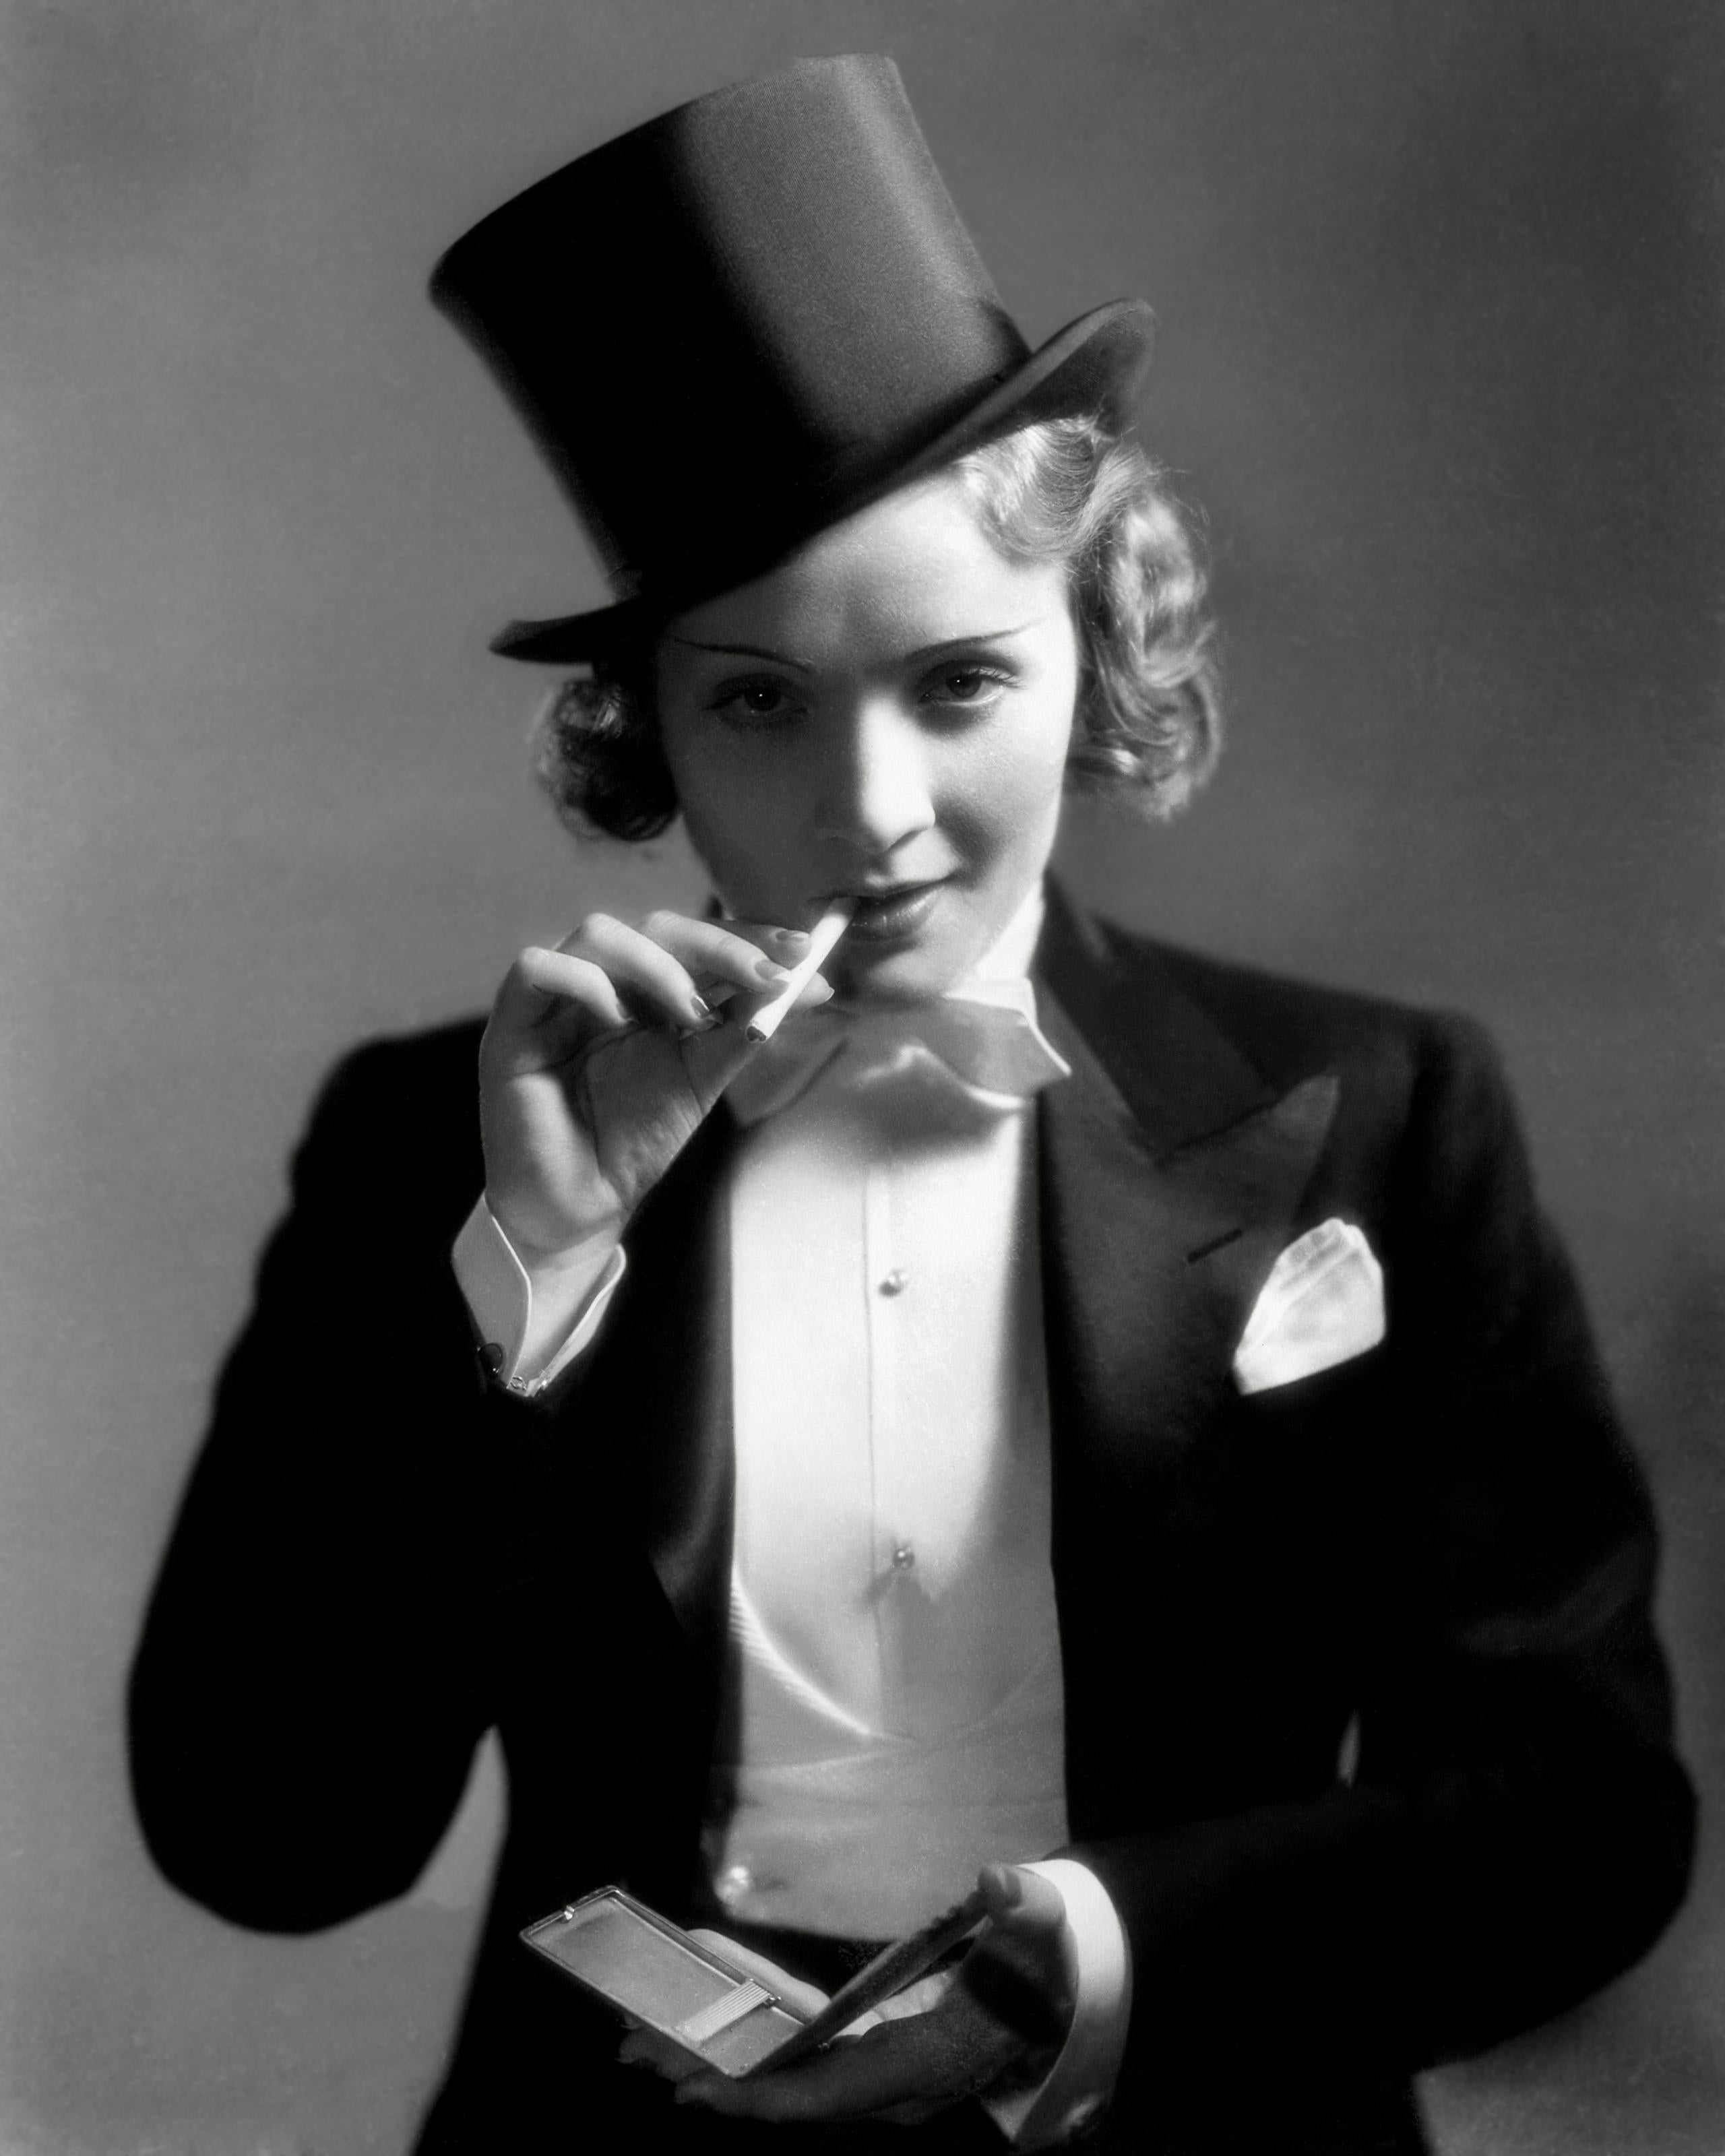 Unknown Black and White Photograph - Marlene Dietrich in Suit for "Morocco" Globe Photos Fine Art Print